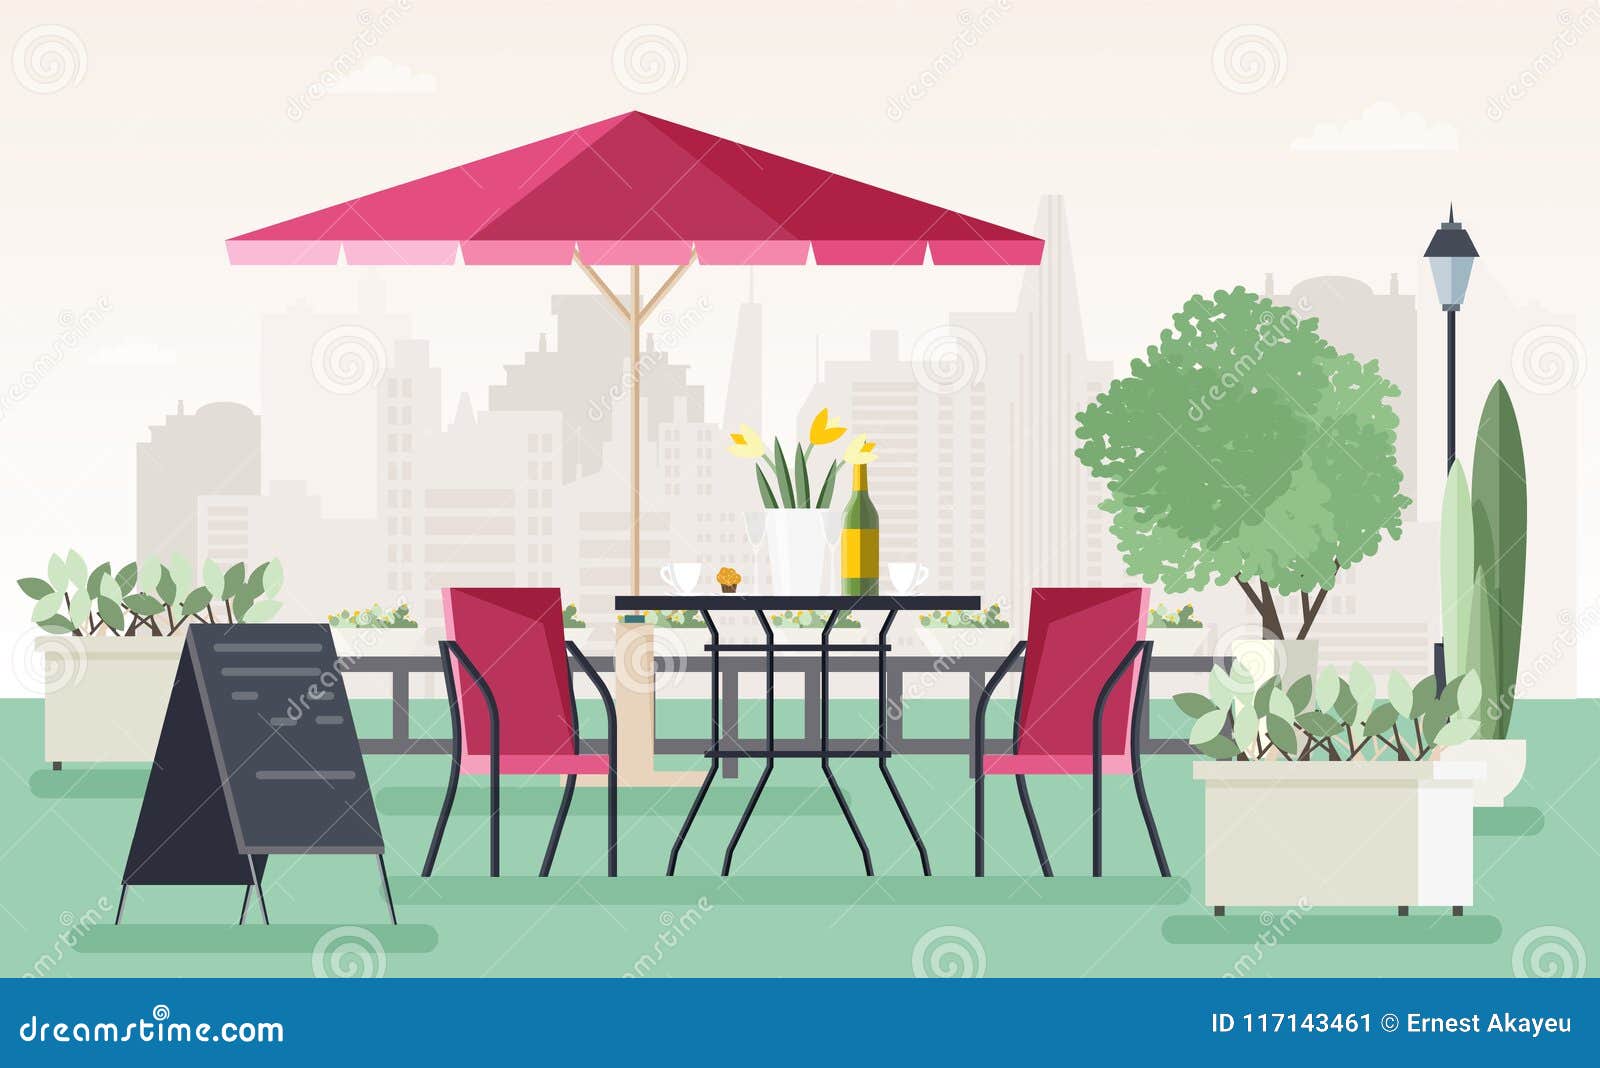 sidewalk cafe or restaurant with table, chairs, umbrella, potted plants and welcome board standing on street against